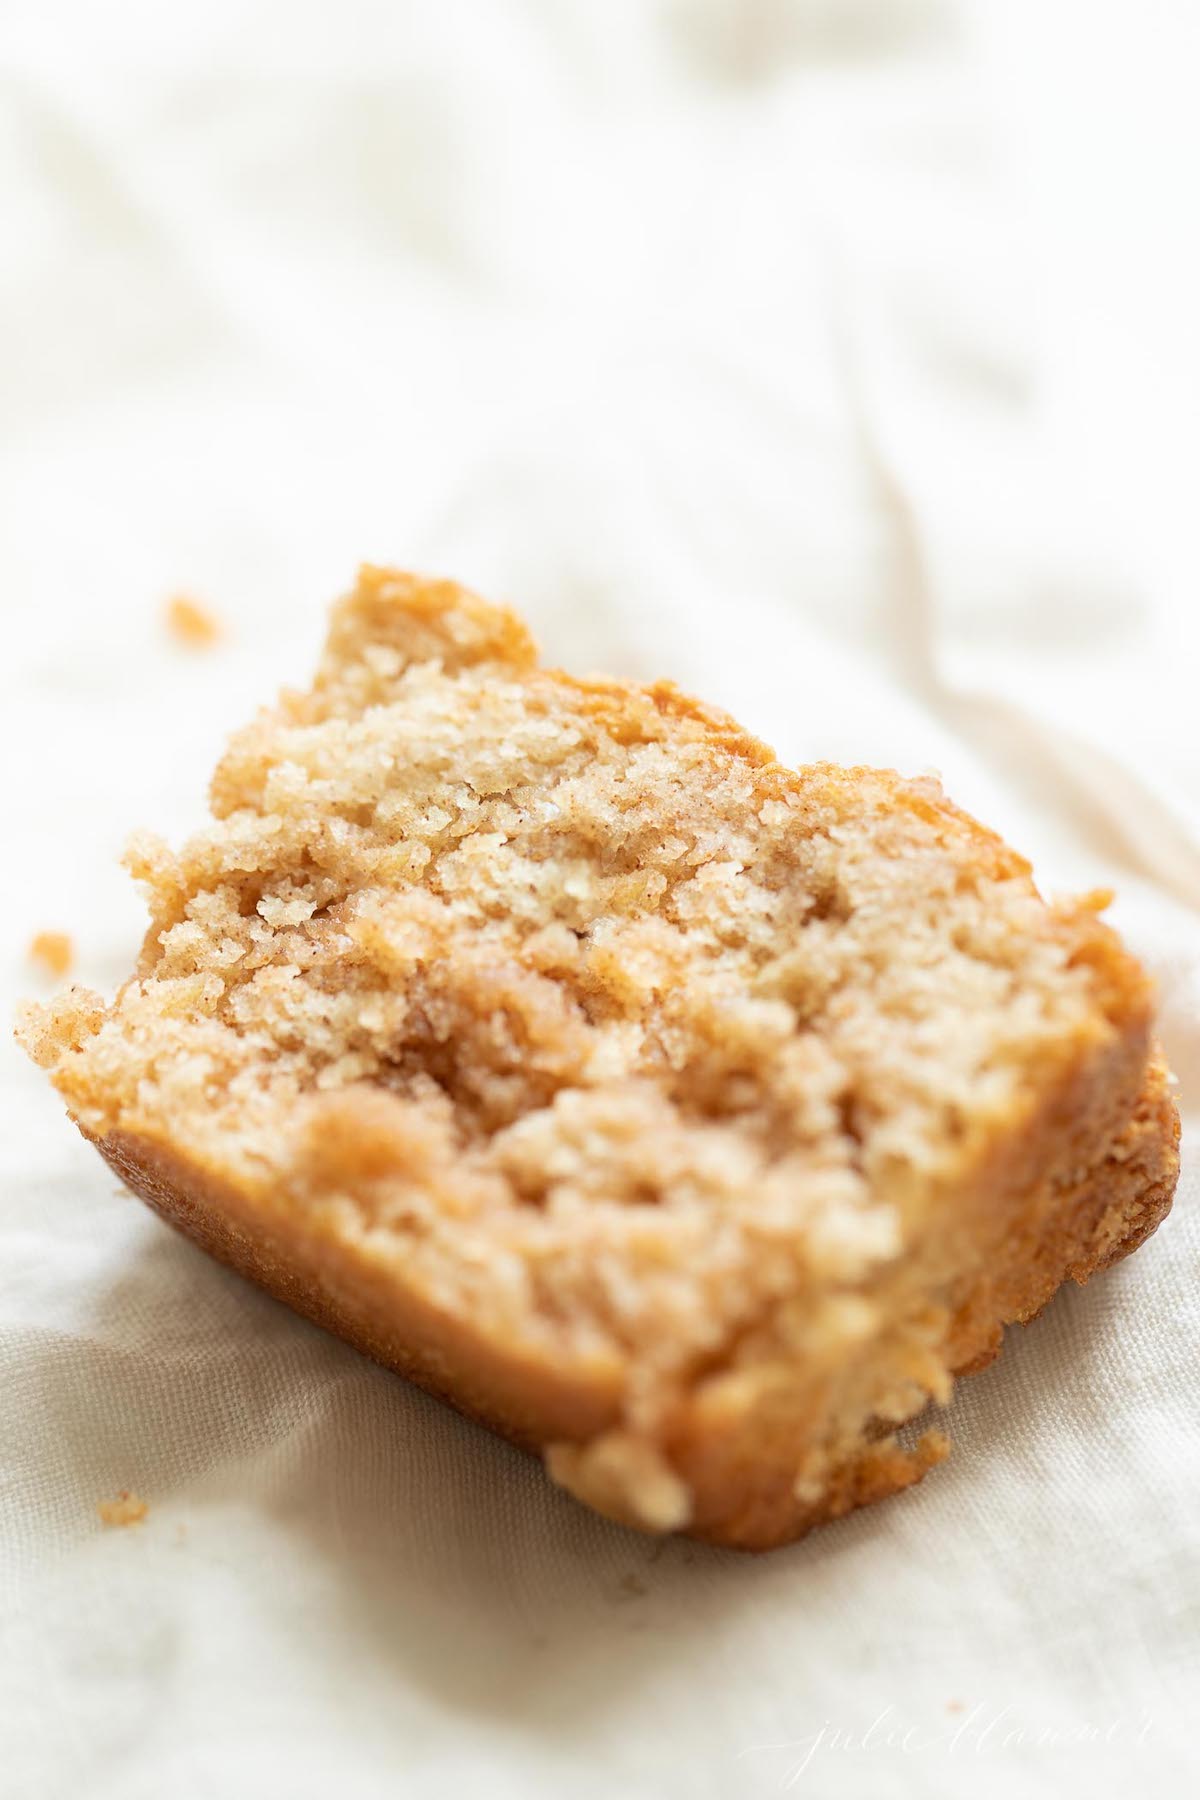 A slice of apple cinnamon bread on a white surface.